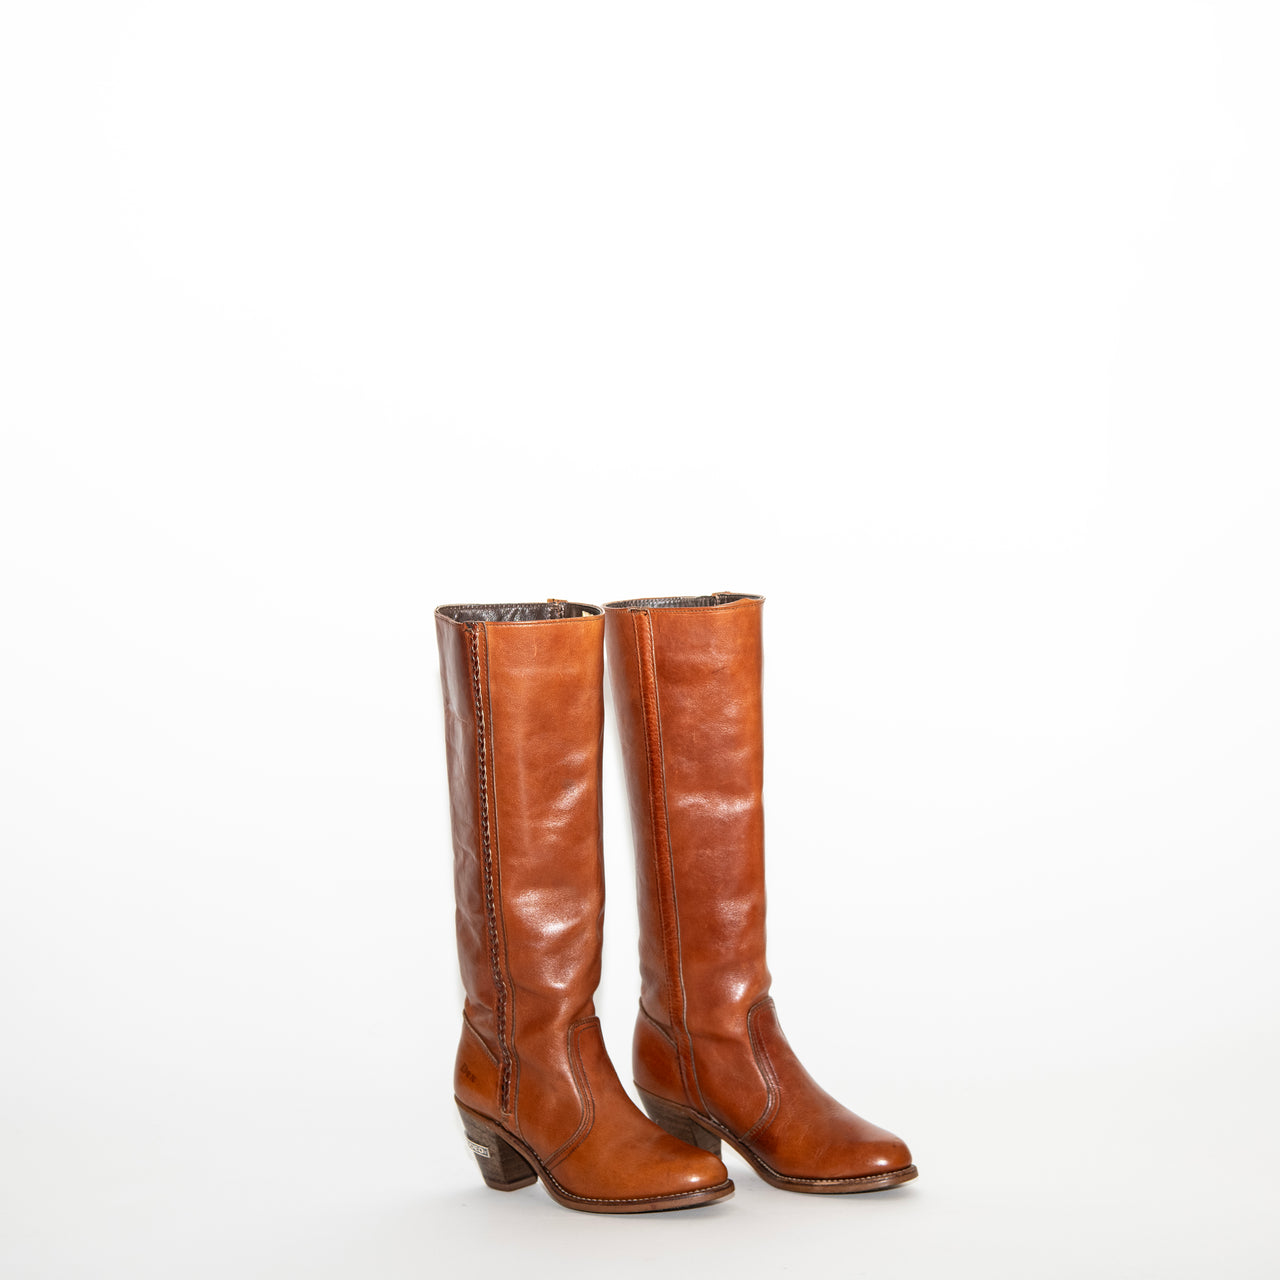 caramel stitched boot